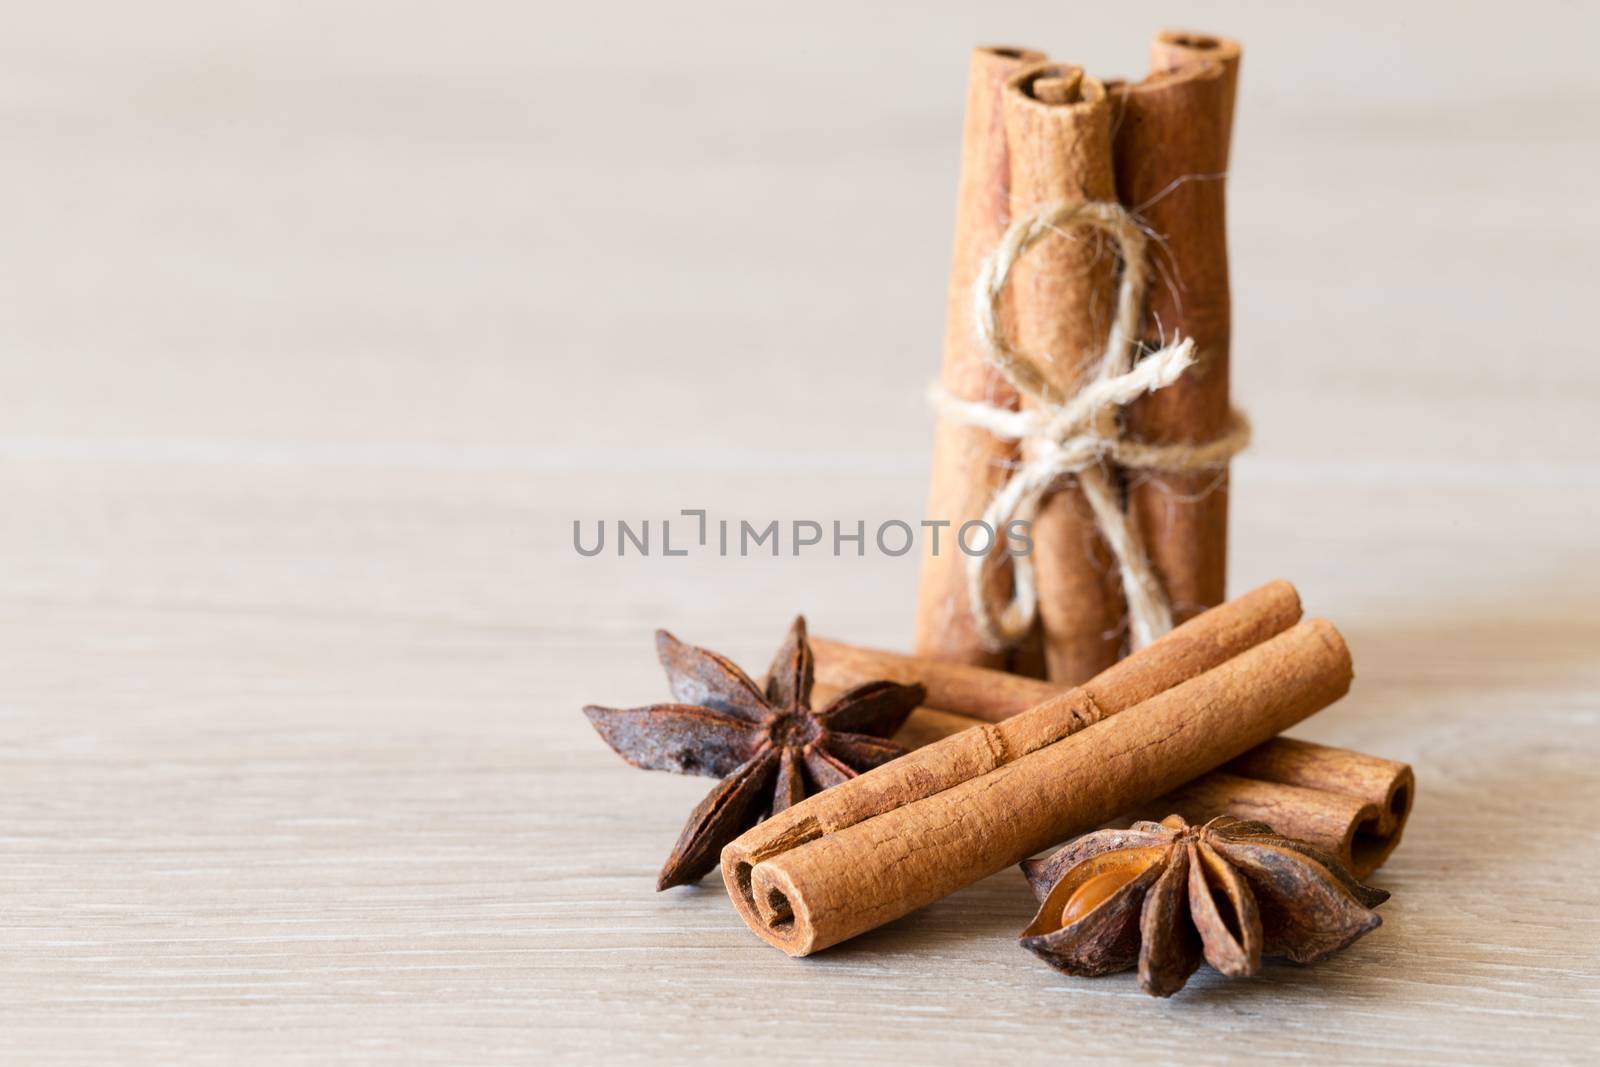 anise and cinnamon, on wooden table

